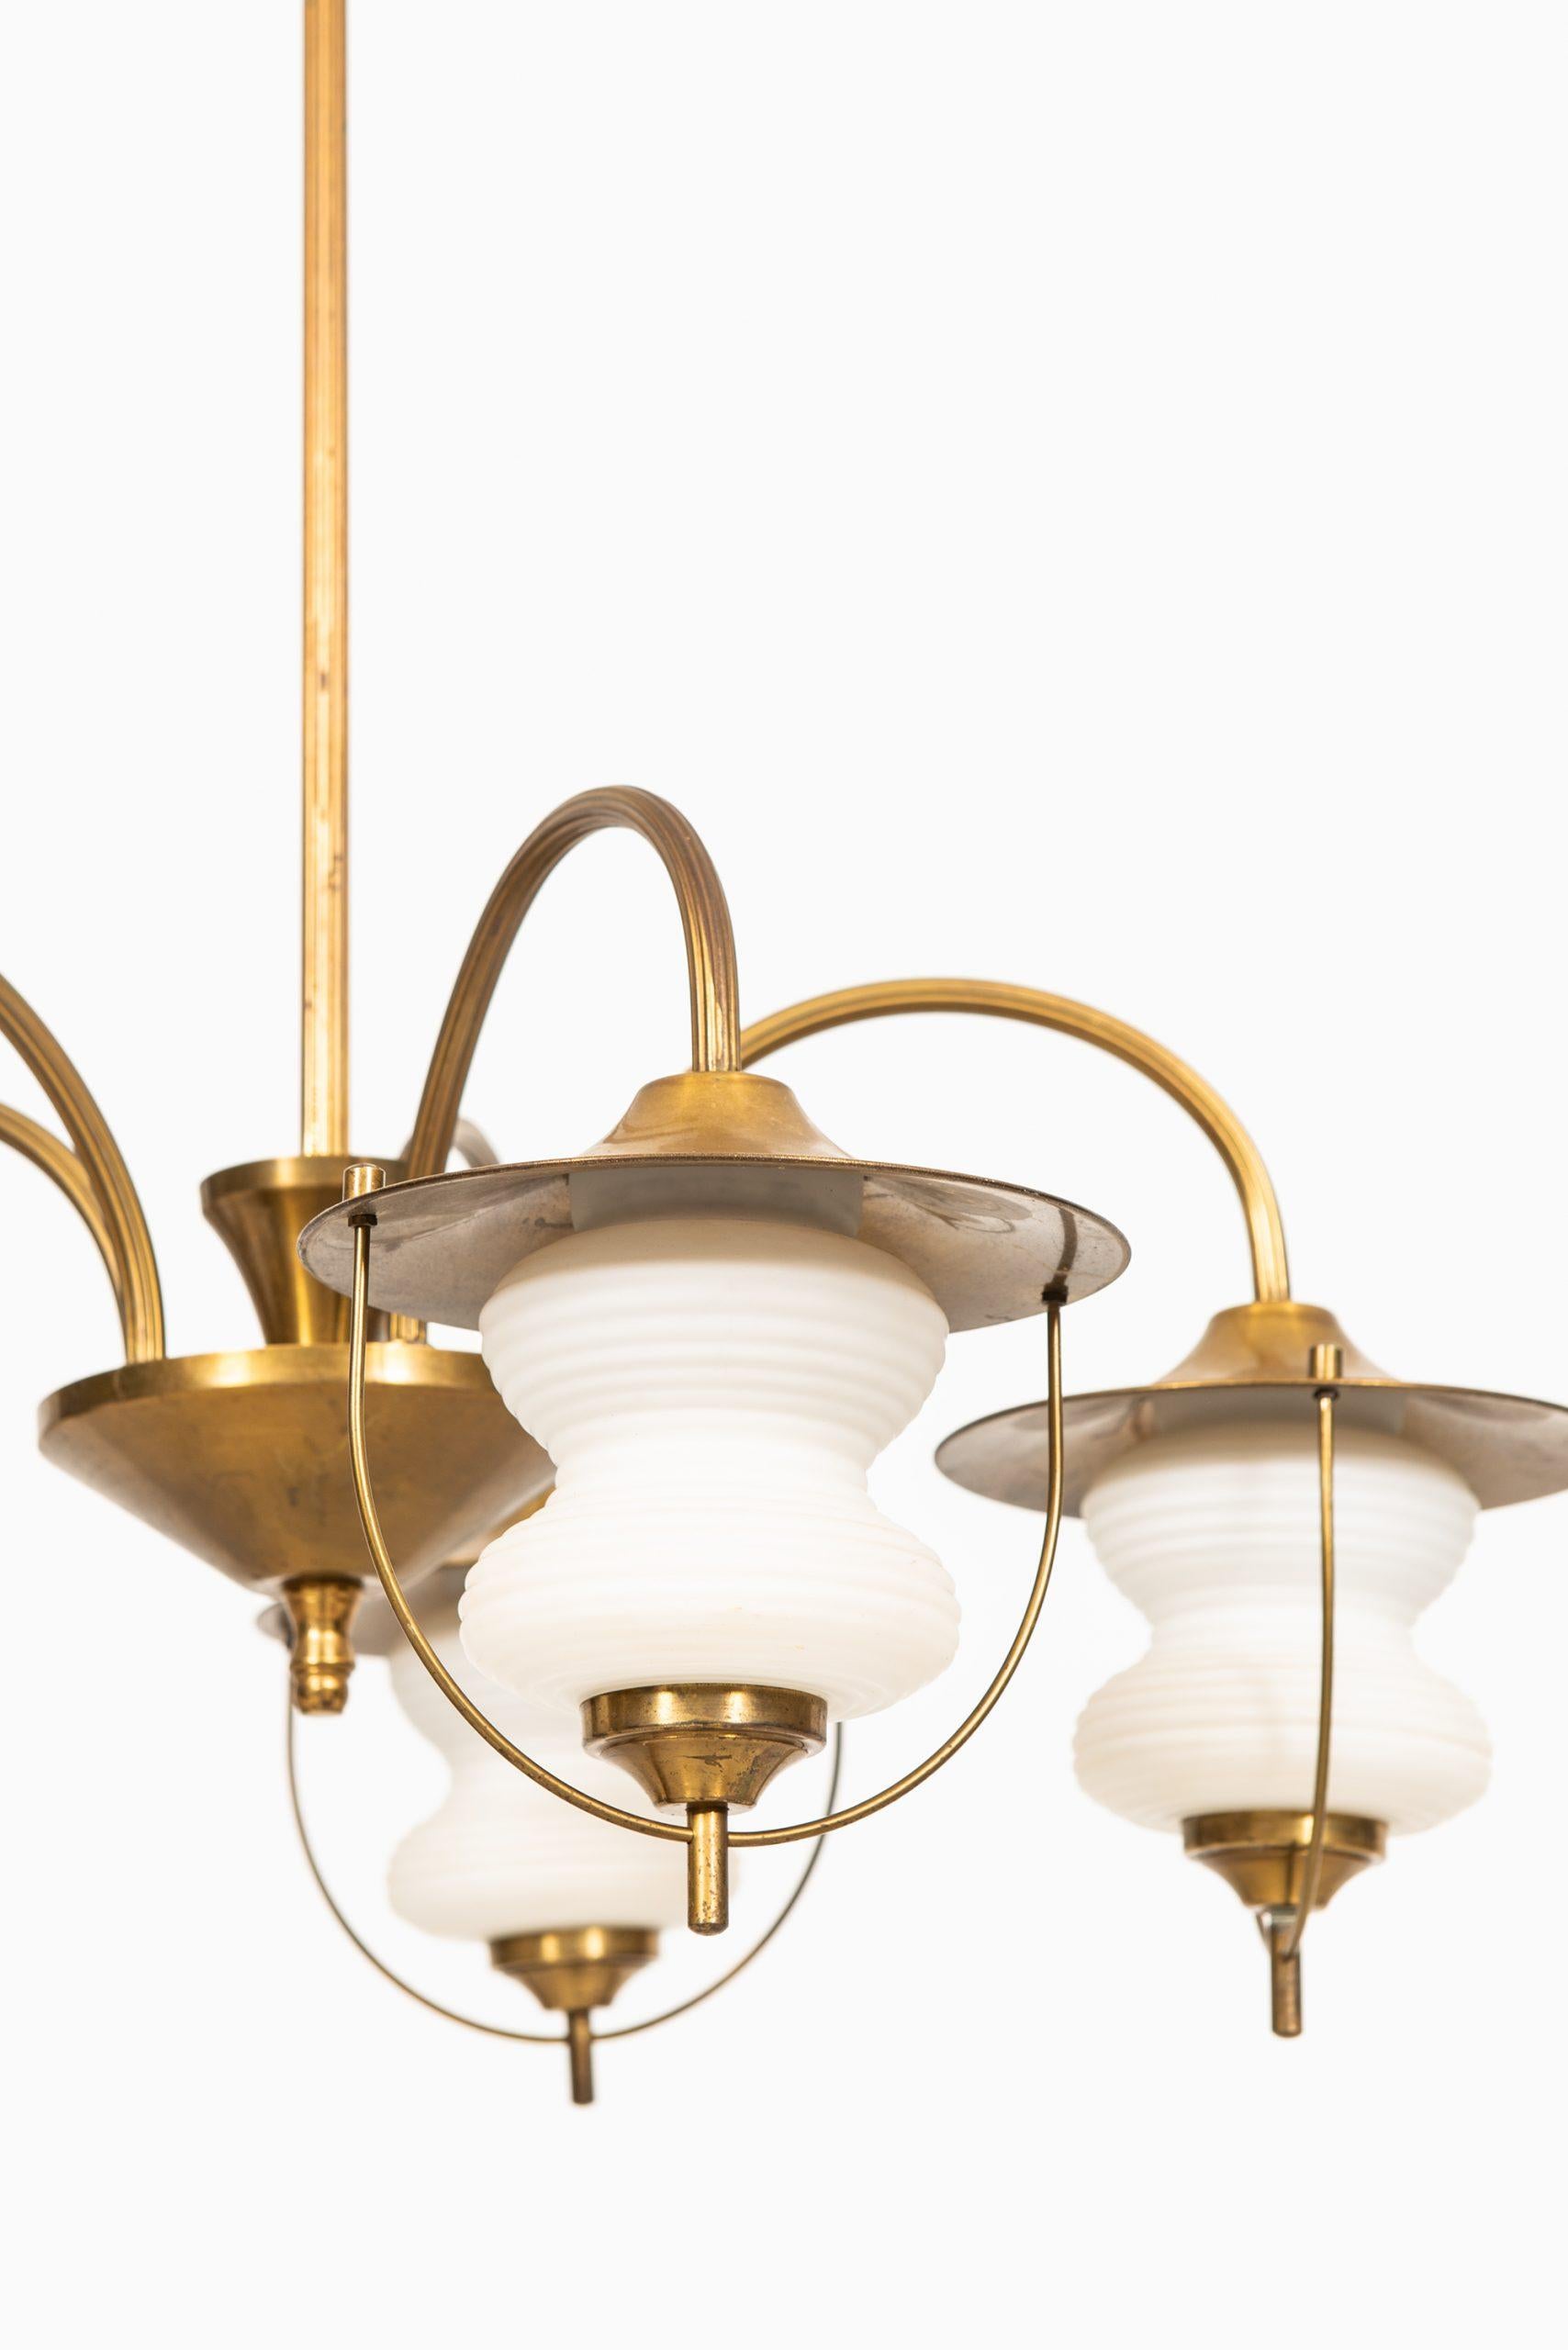 Danish Ceiling Lamps Produced in Denmark